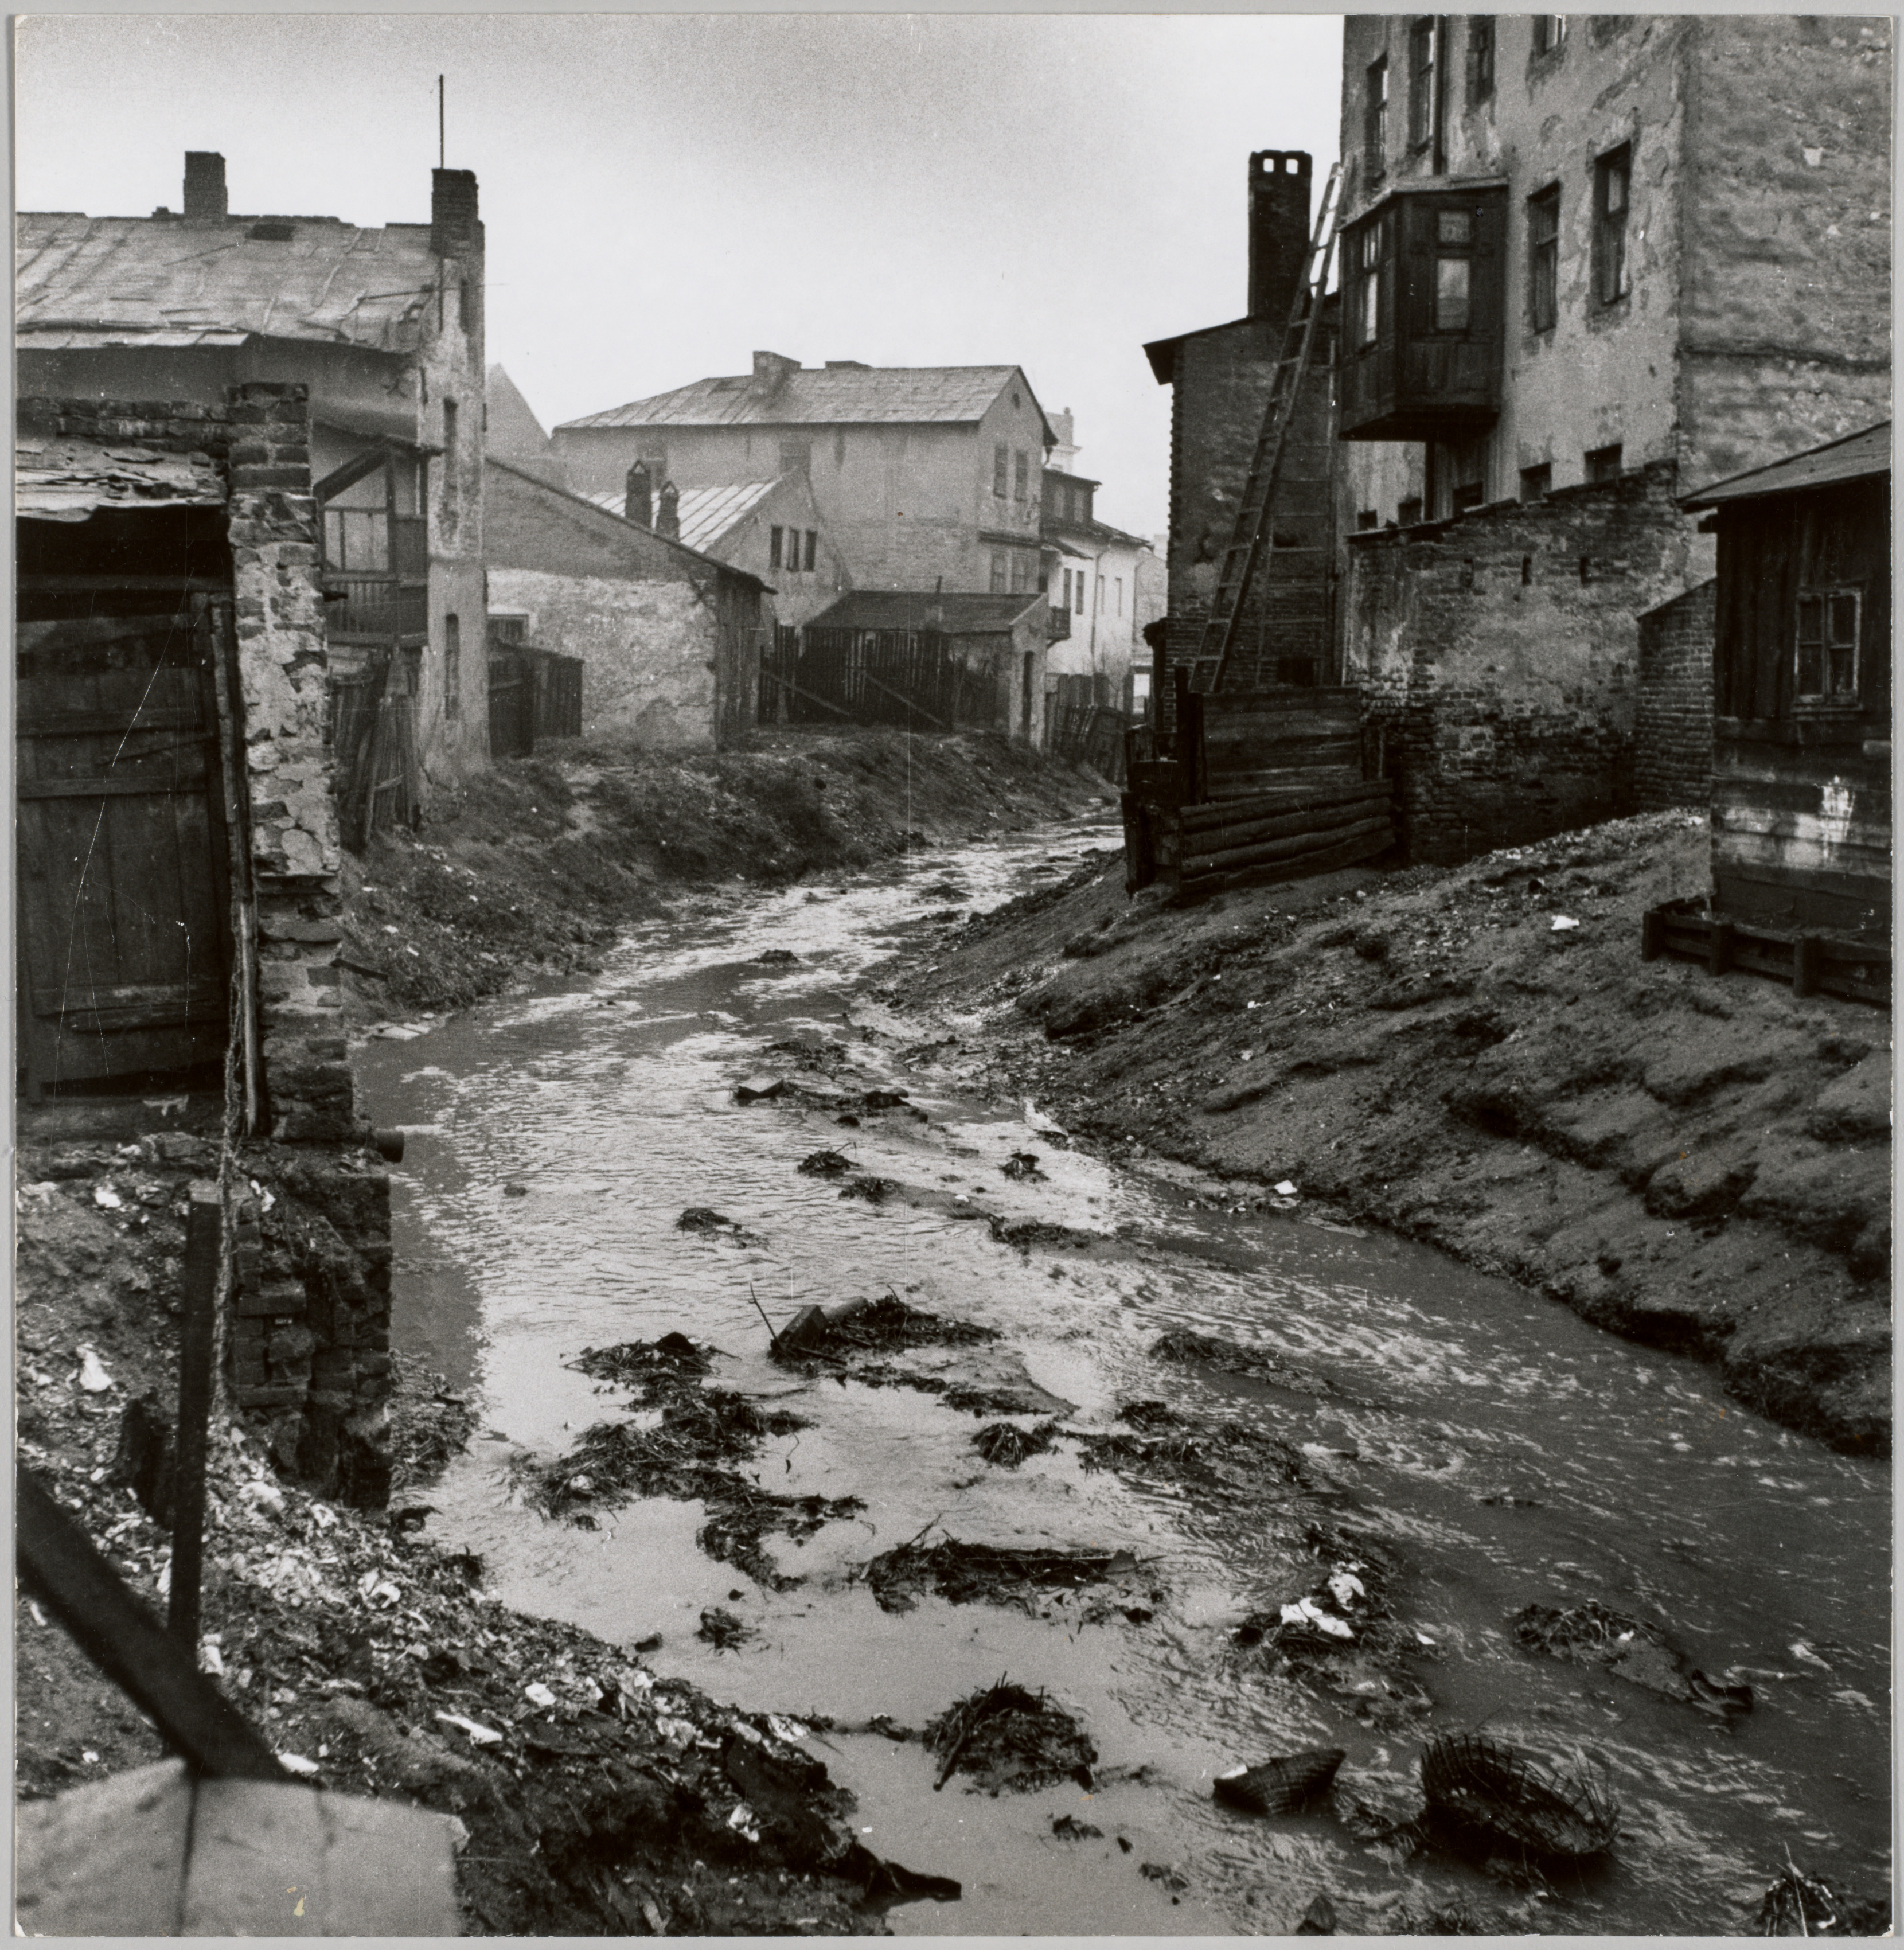 An open sewer in the Jewish district of Lublin